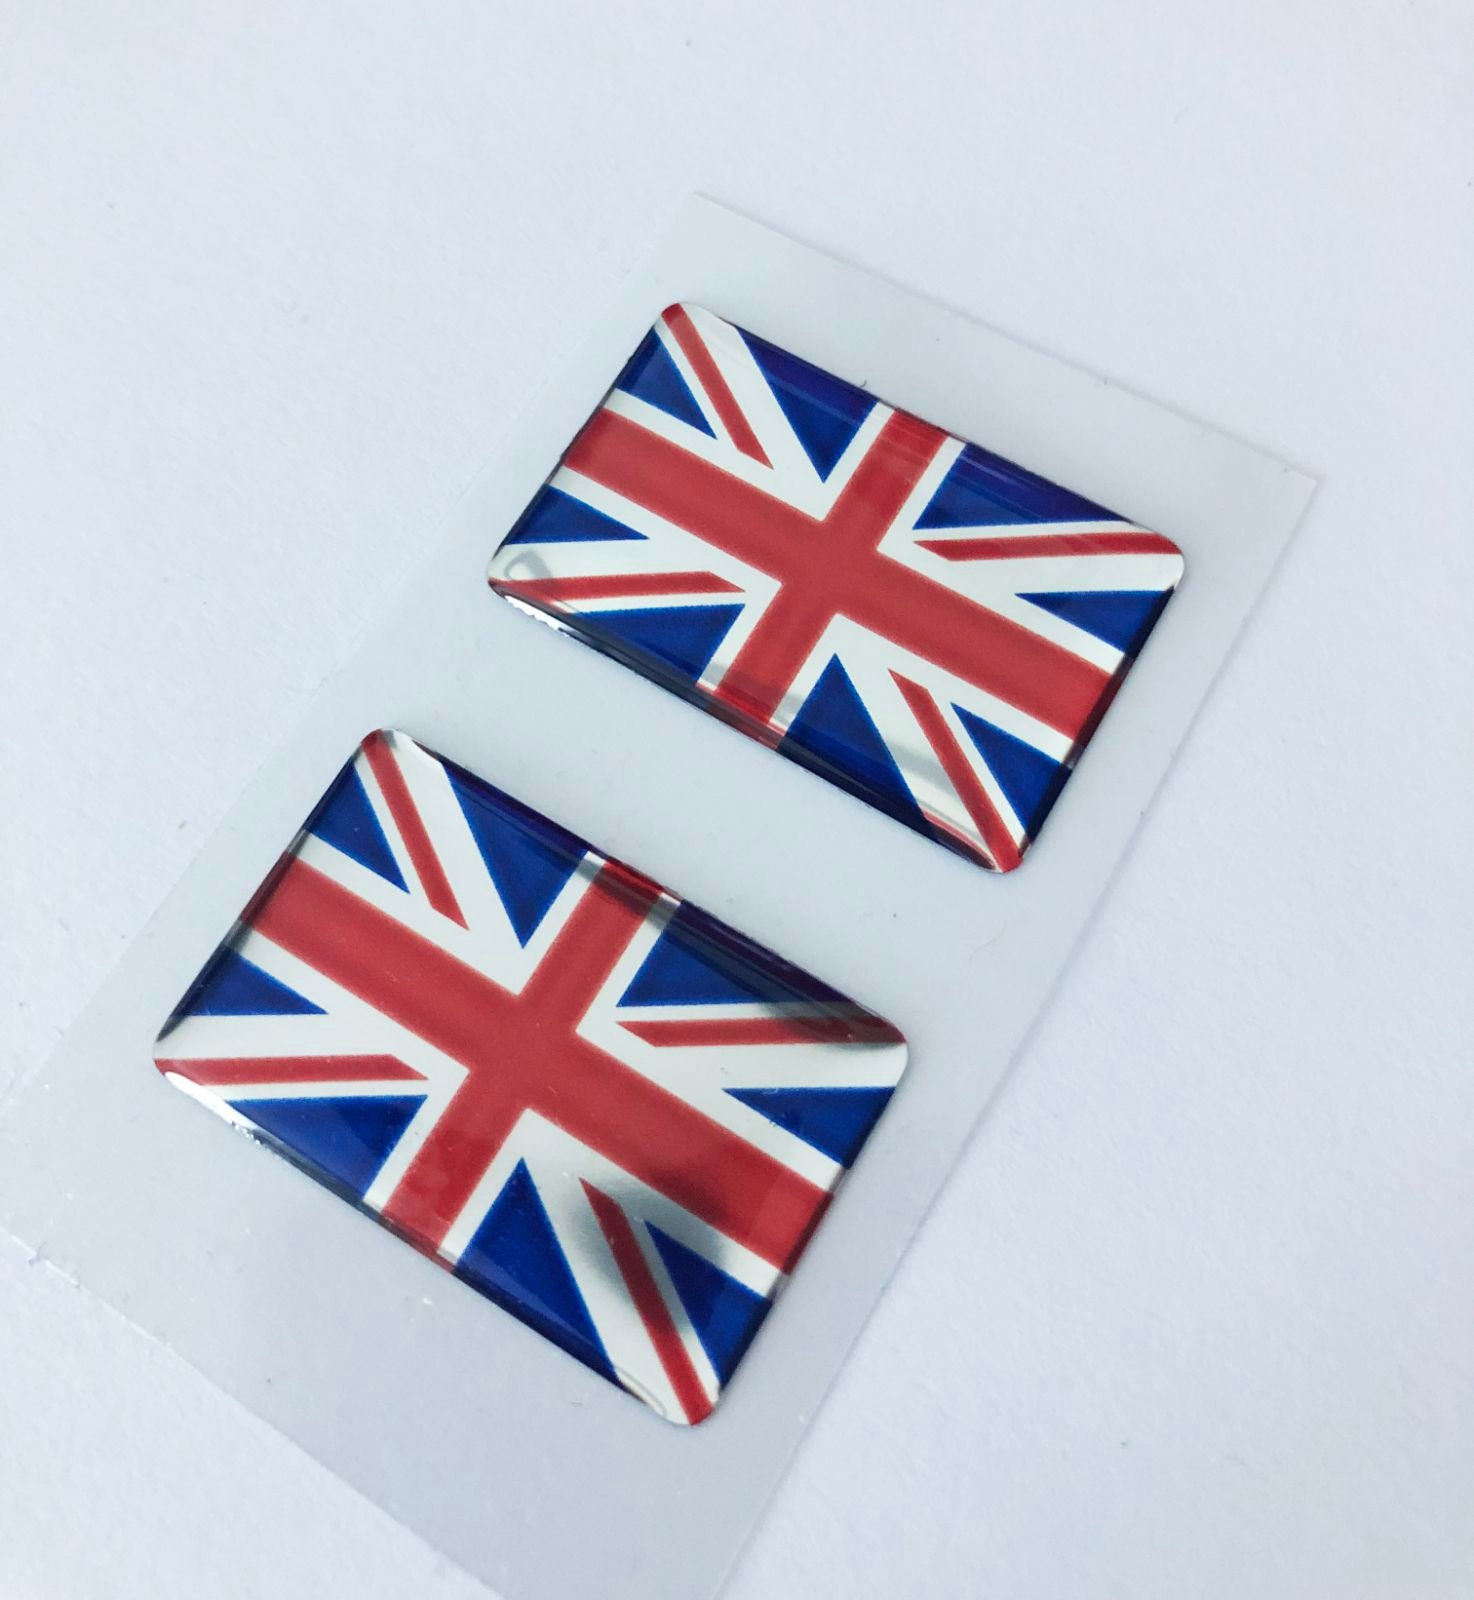 Xotic Tech 2x 3D Red Blue Union Jack Foot Decal Stickers for Mini